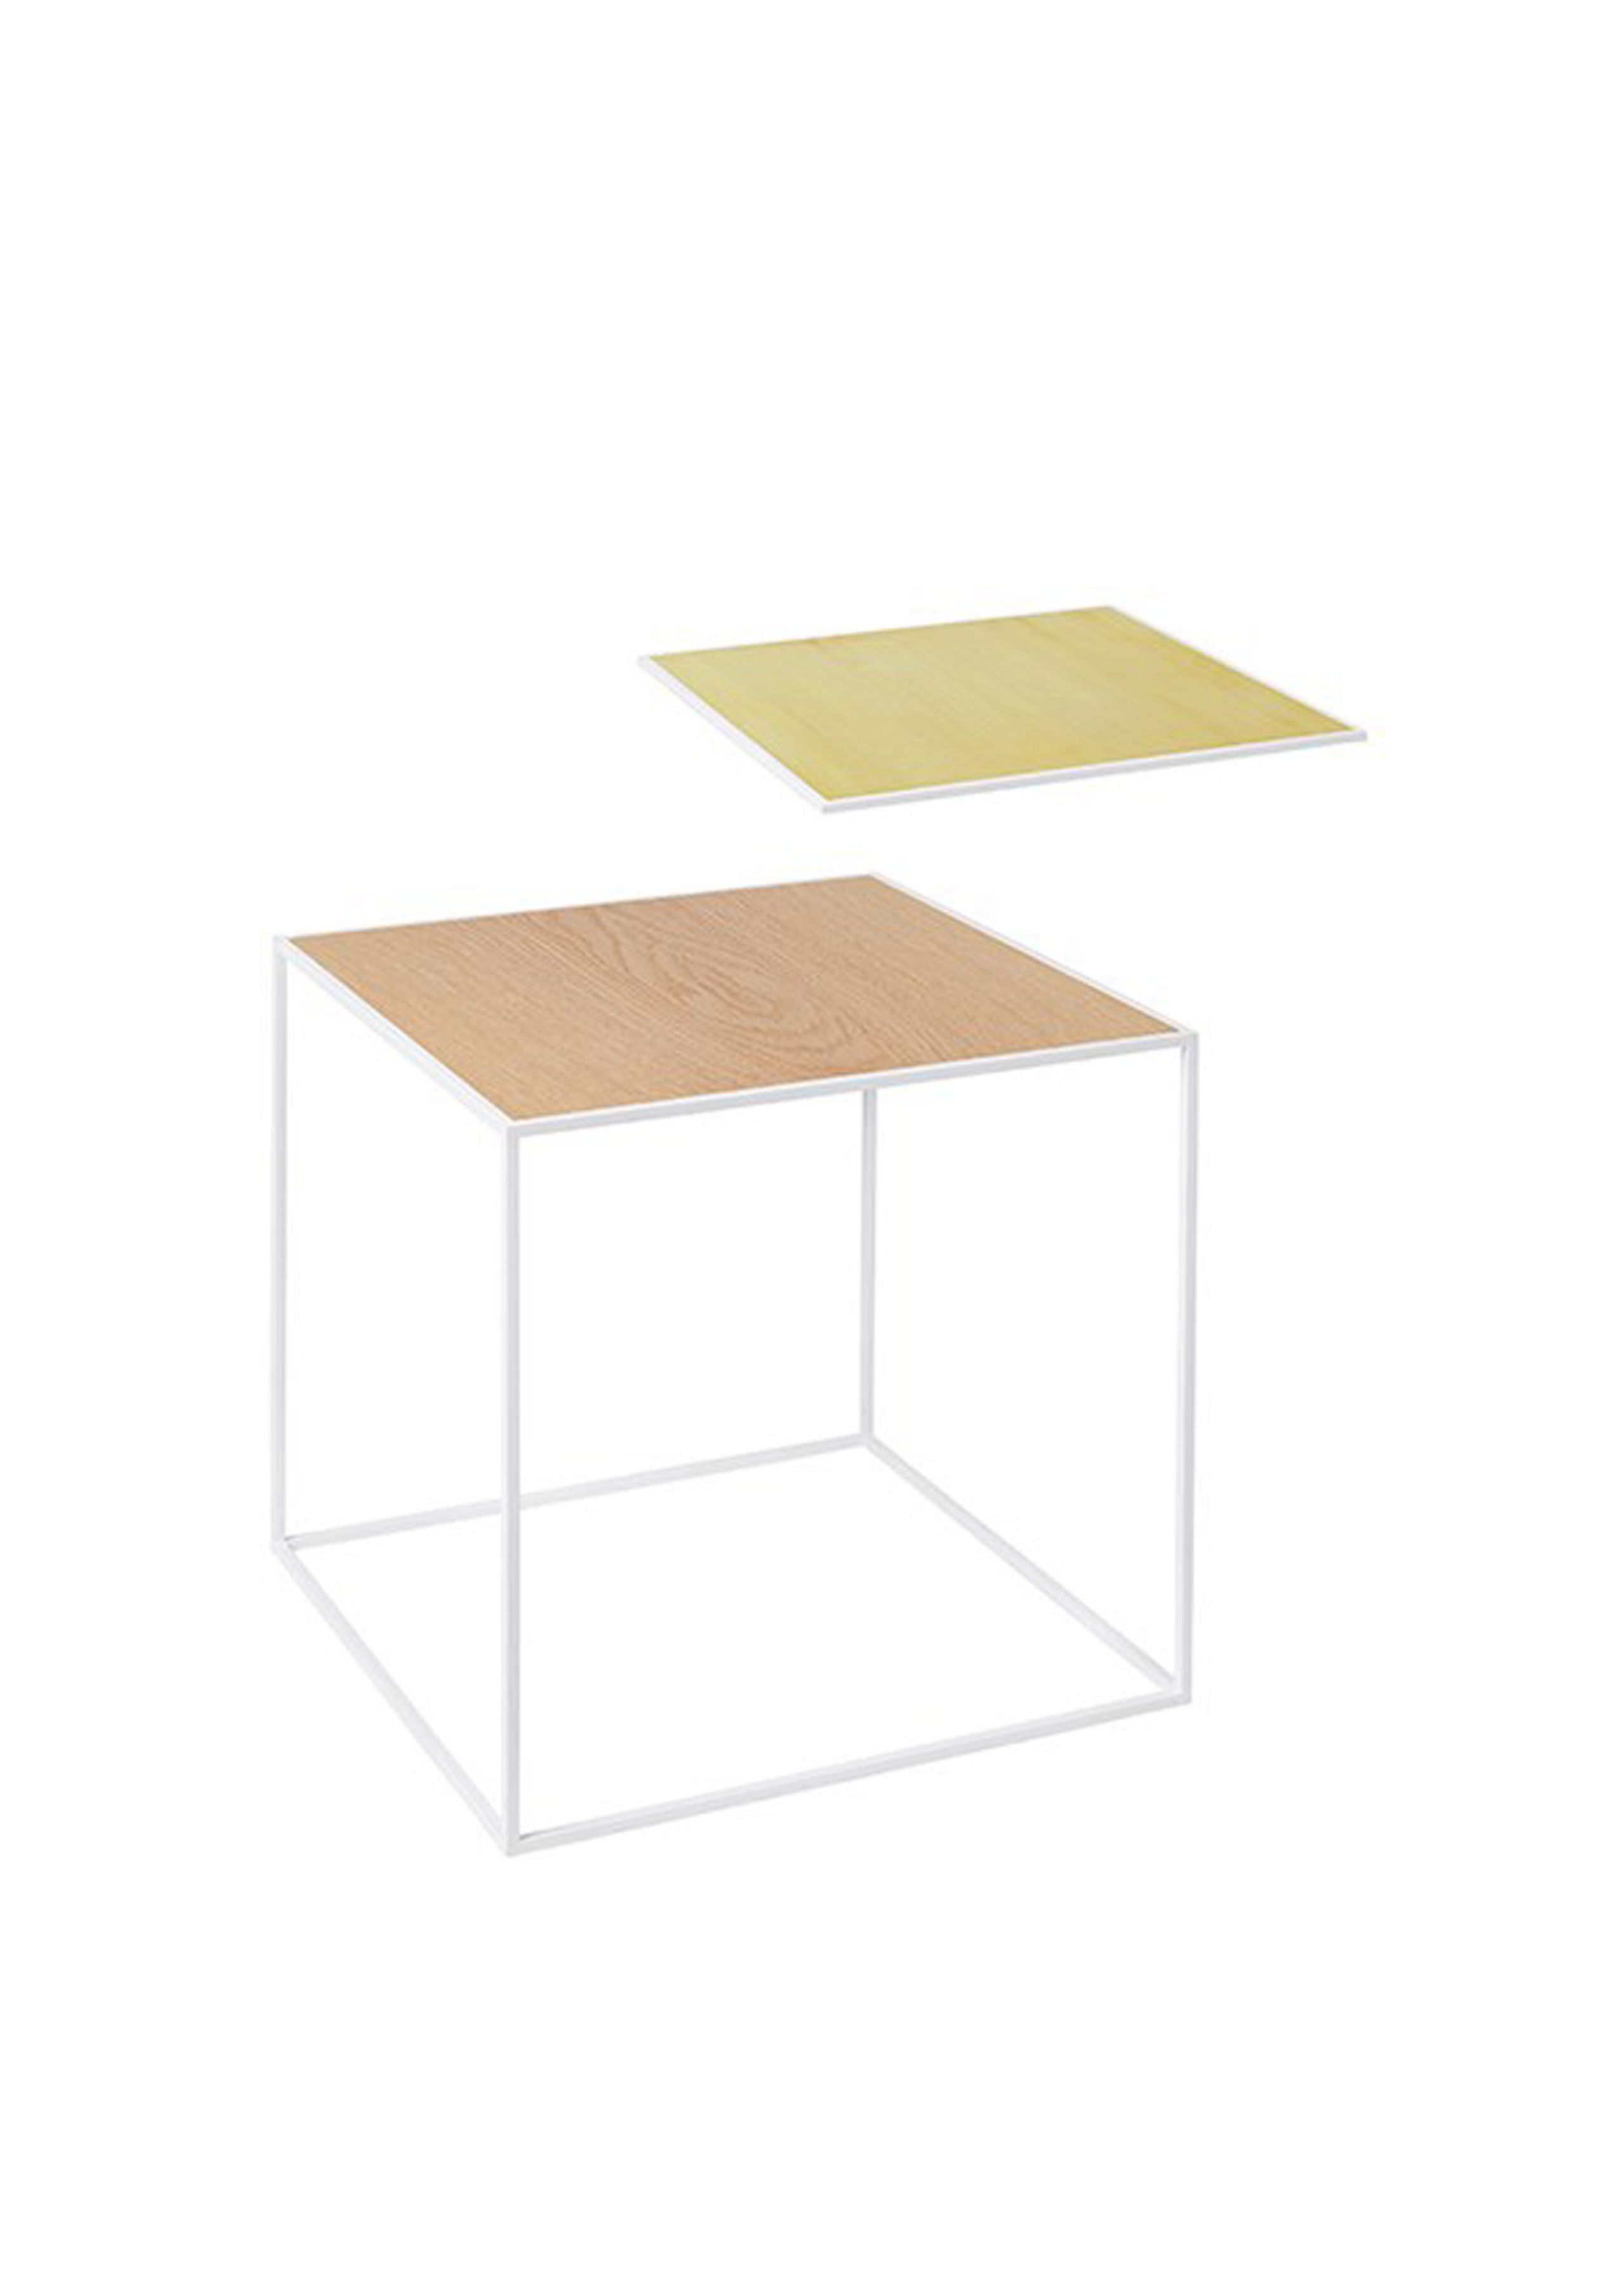 By Lassen - Conseil d'administration - Twin 35 Table - Oak/Brass with White Base